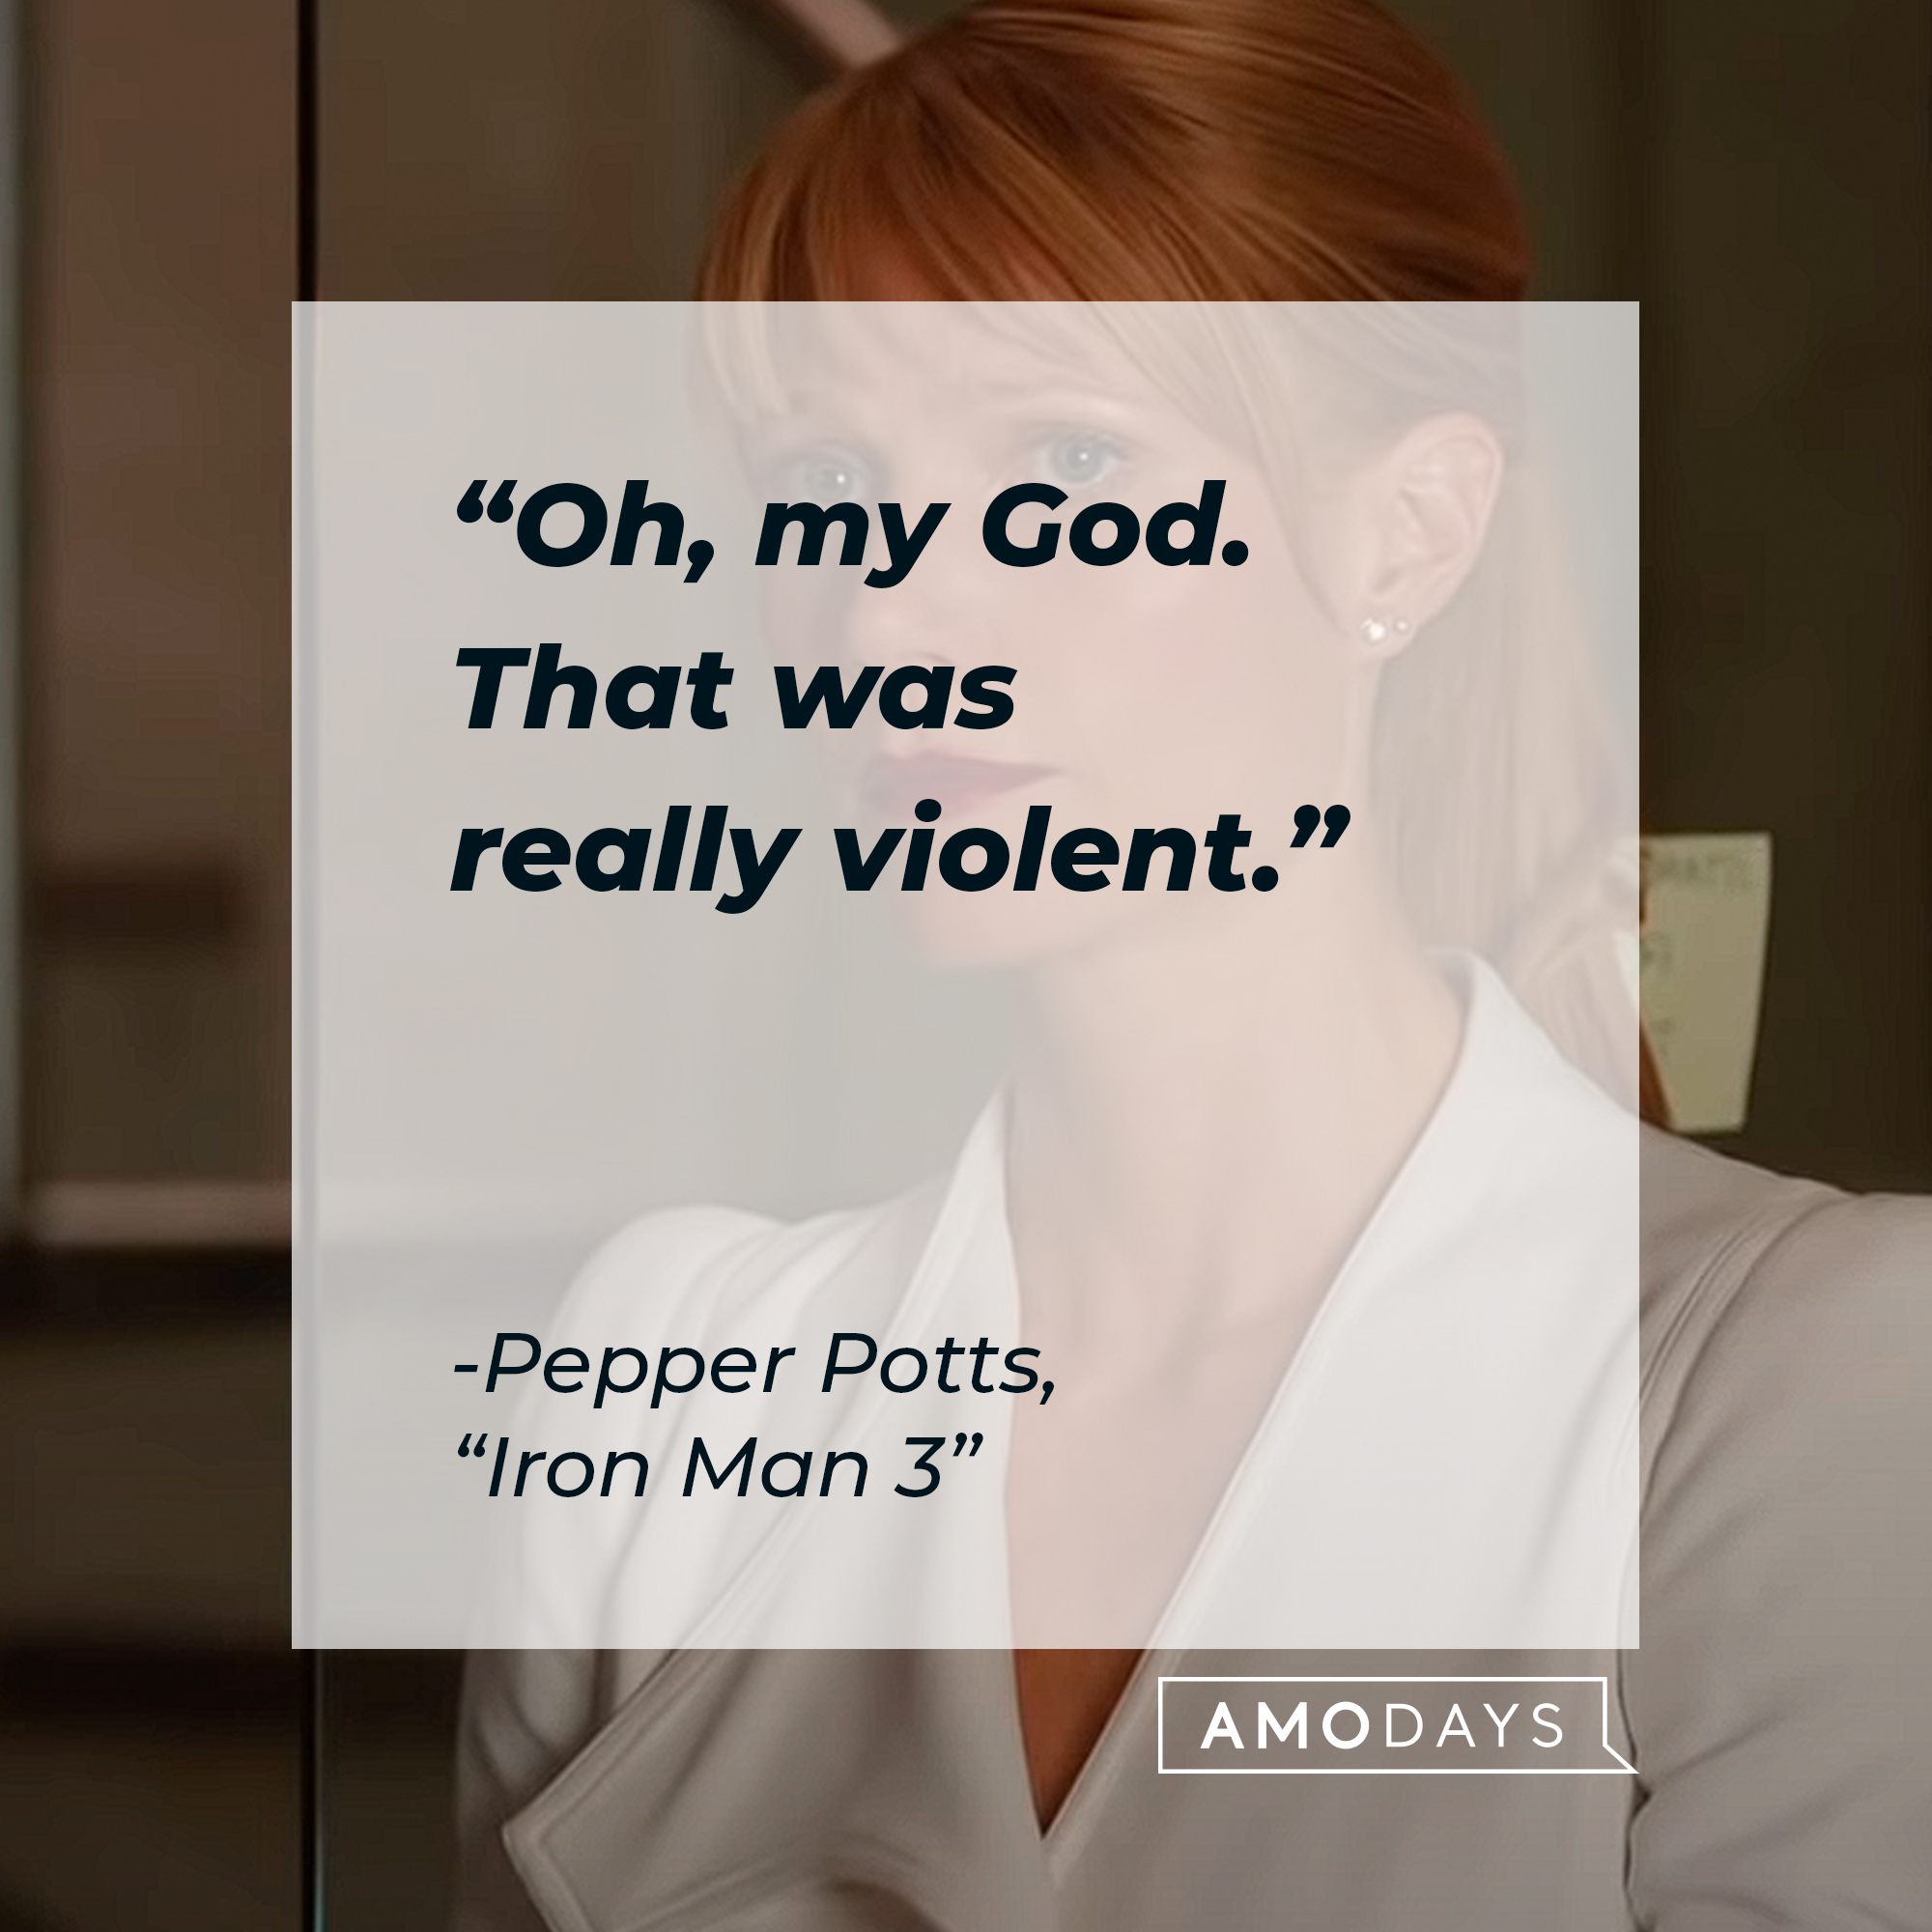 Pepper Potts‘ quote: "Oh, my God. That was really violent." | Image: AmoDays